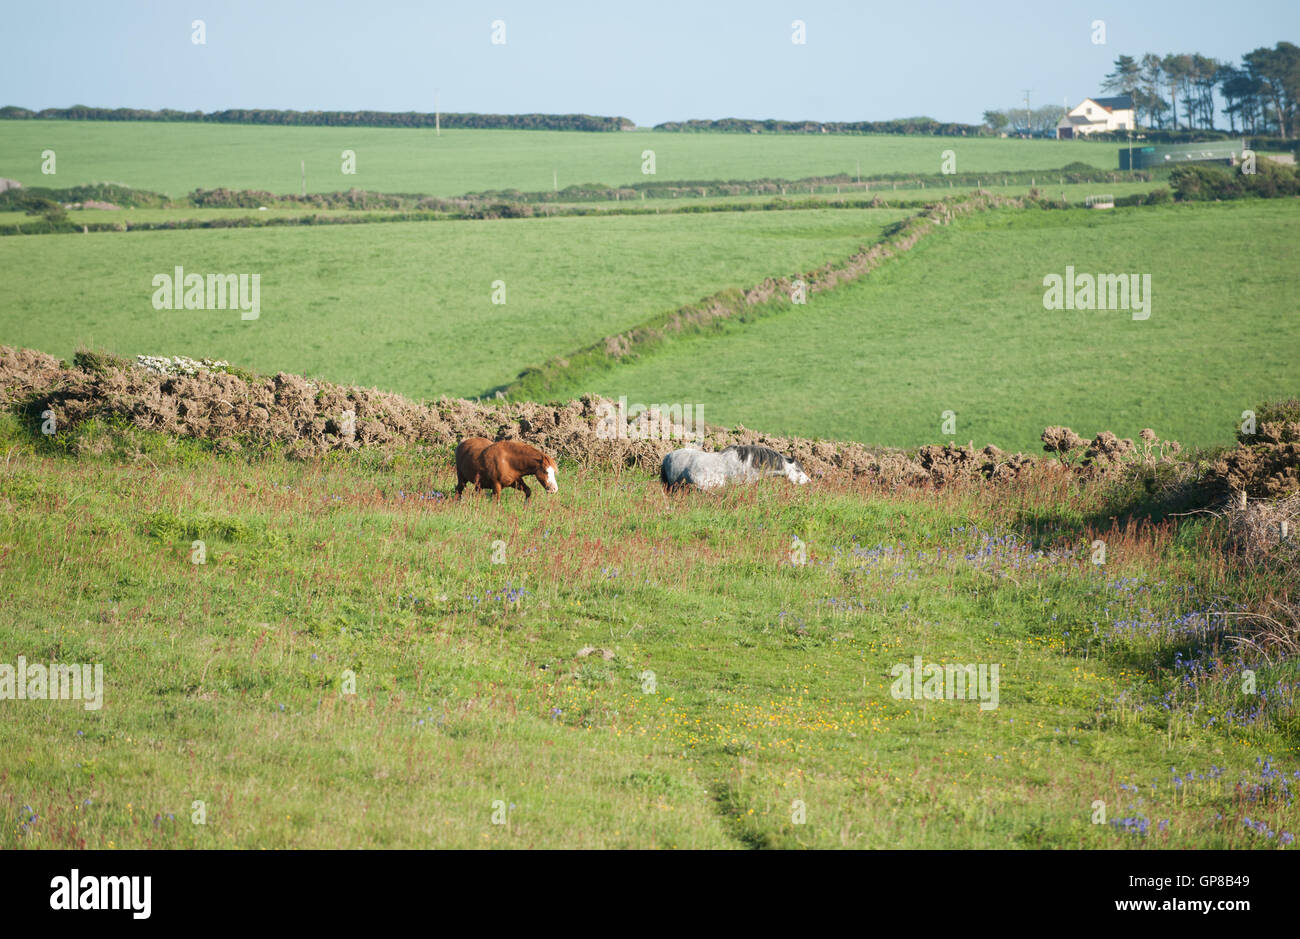 Swansea, Wales, UK. ARCHIVE IMAGES Wild Pembrokeshire horses graze in a field near the coastal path. Stock Photo